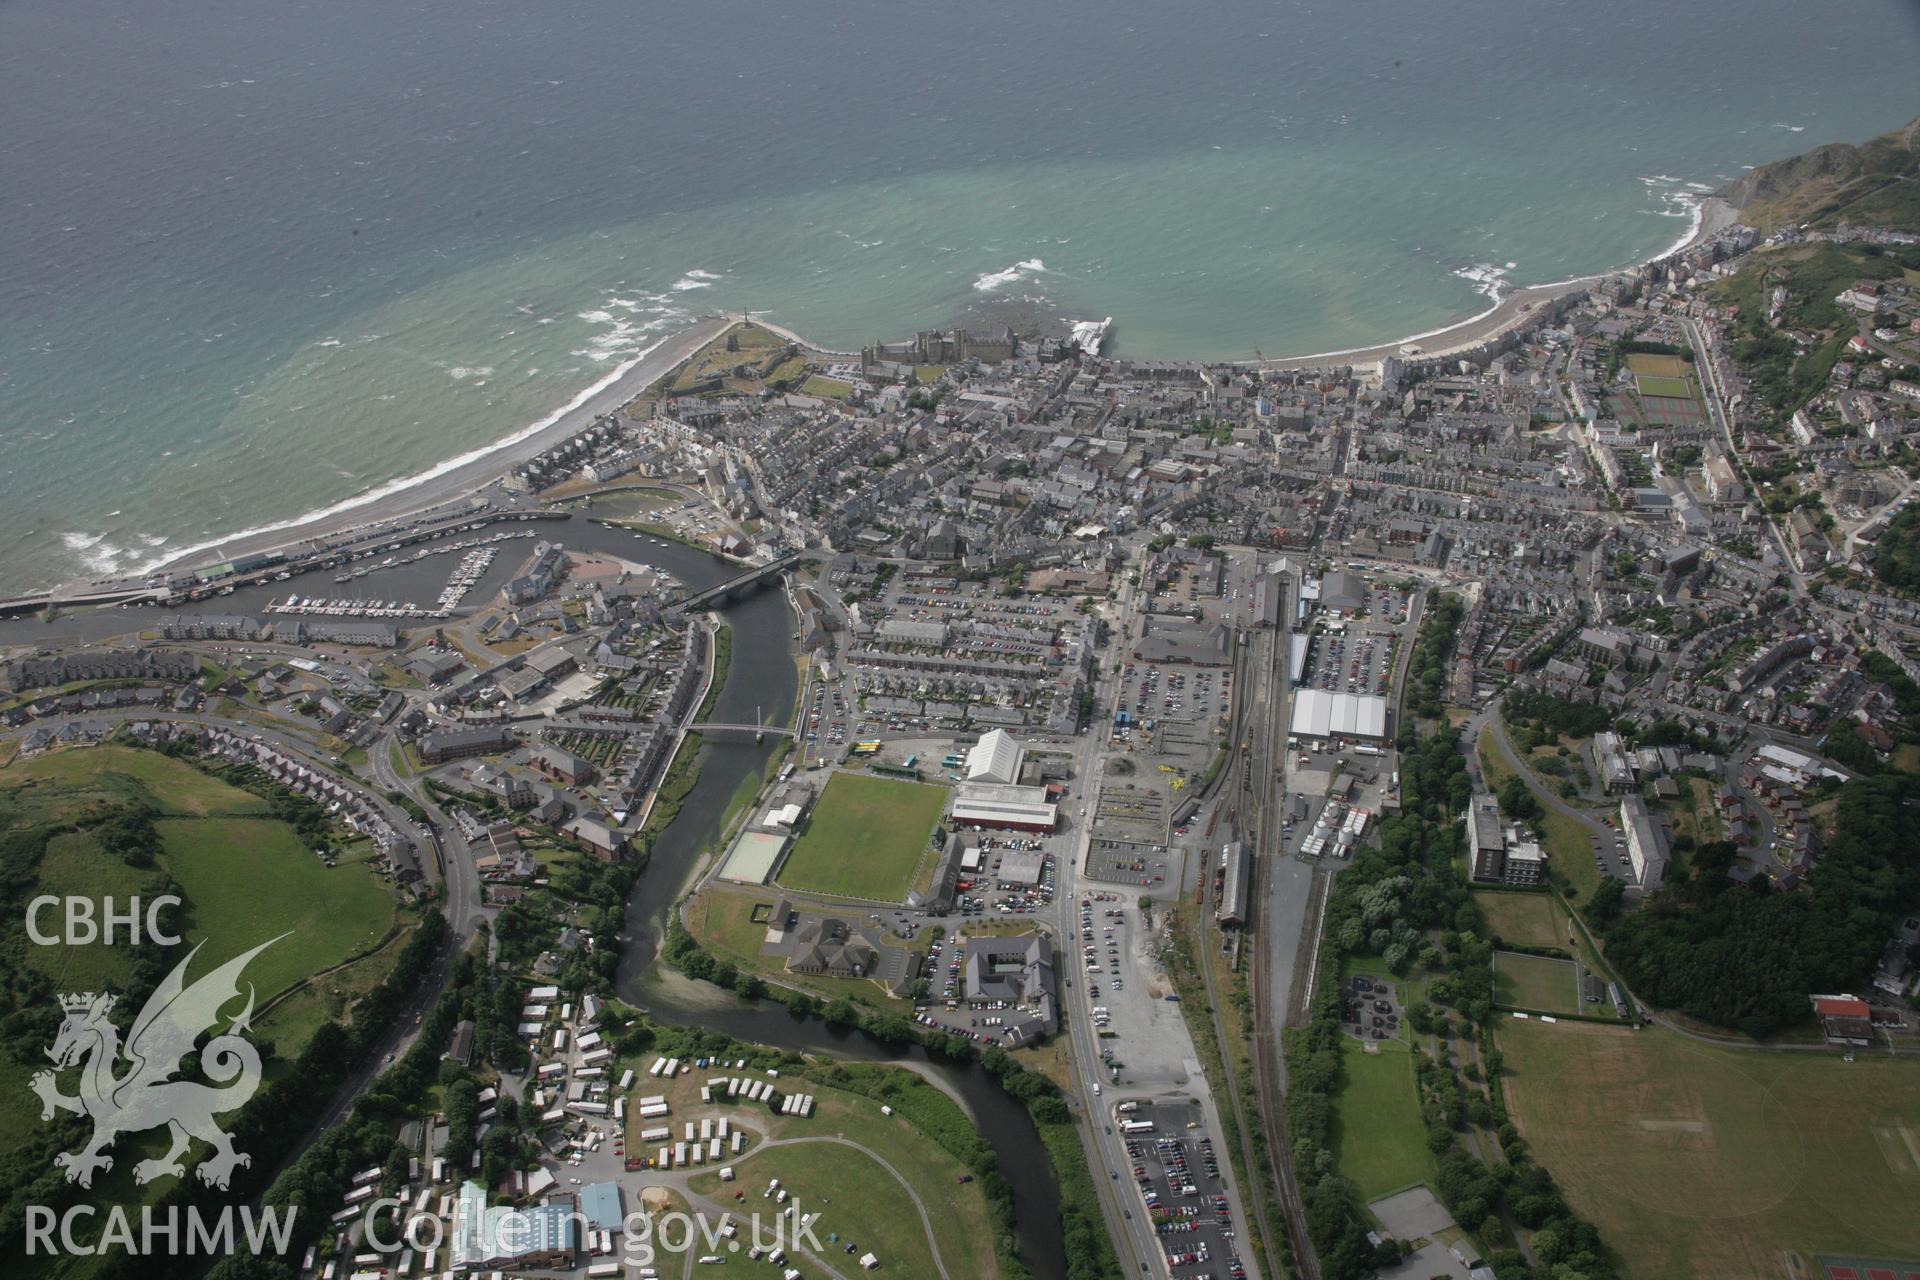 RCAHMW digital colour oblique photograph of Aberystwyth viewed from the south-east. Taken on 18/07/2005 by T.G. Driver.